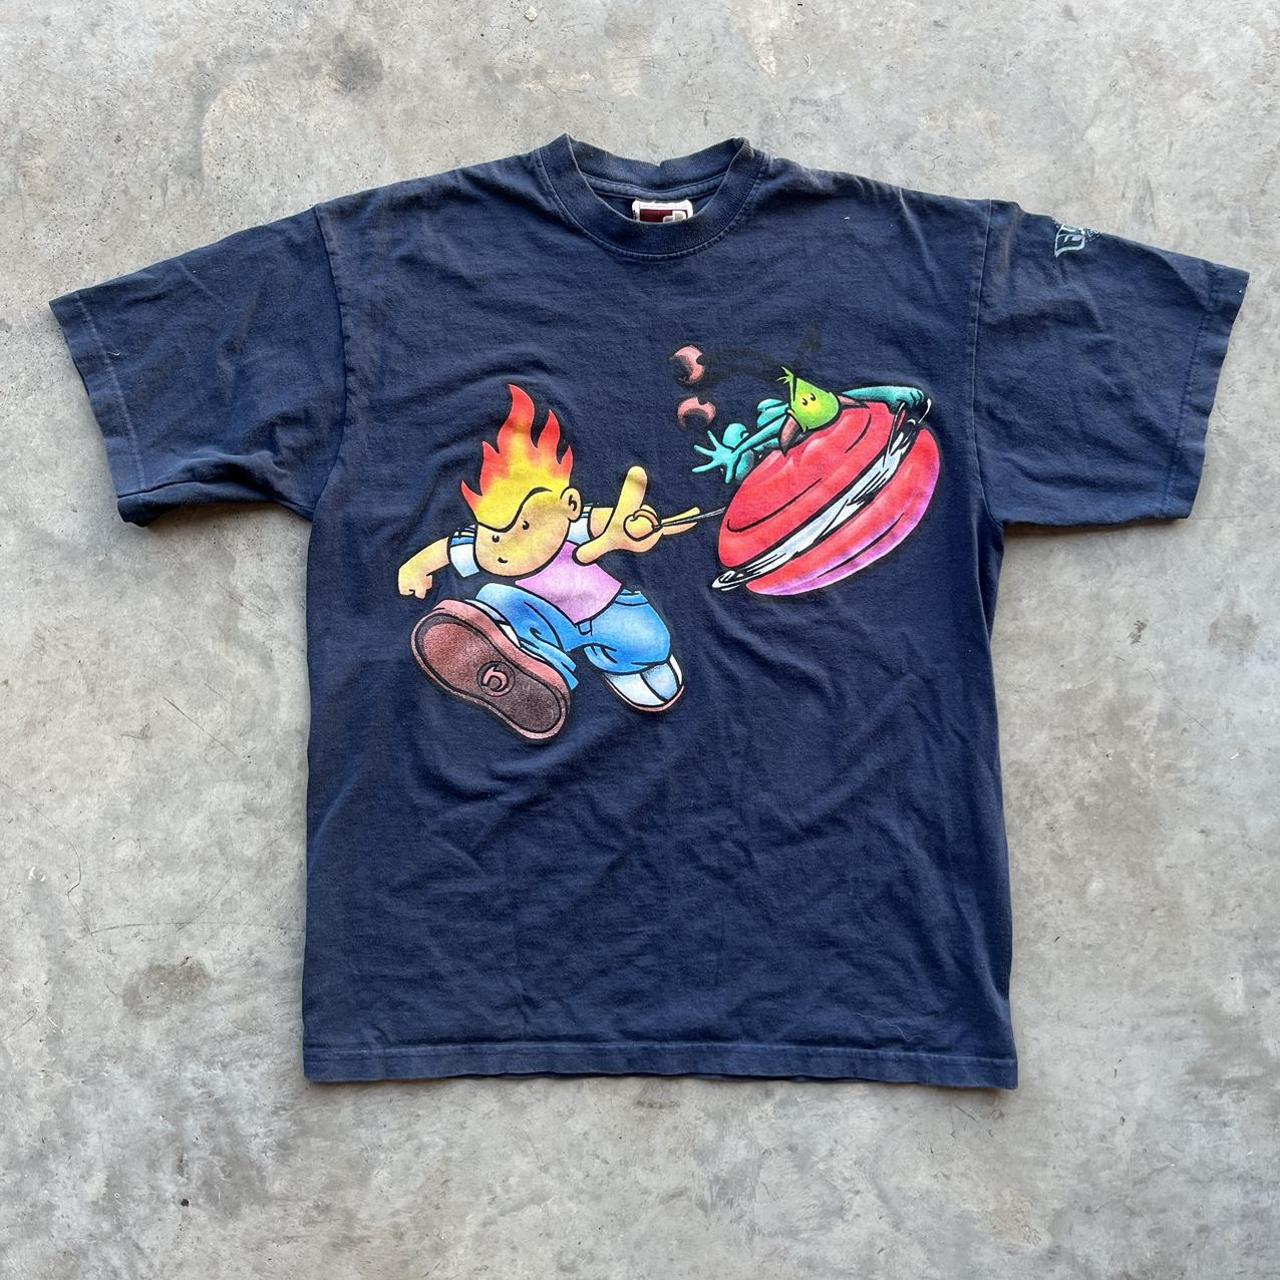 Jnco Flamehead shirt A Jnco grail with absolutely no... - Depop